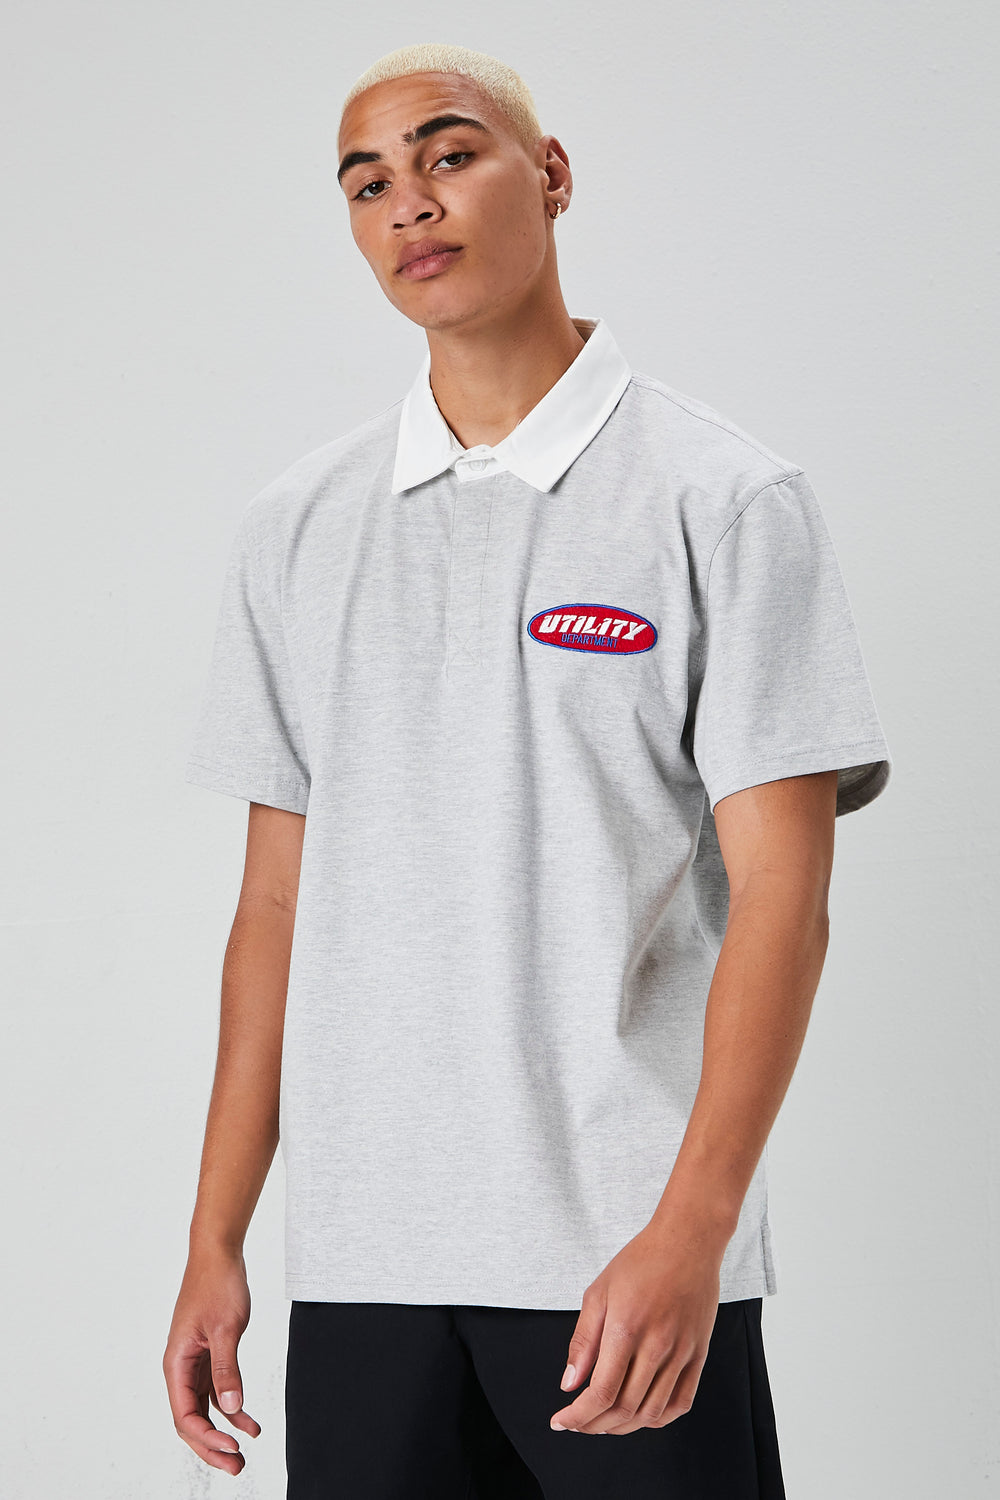 Utility Department Patch Polo Shirt Heather Grey